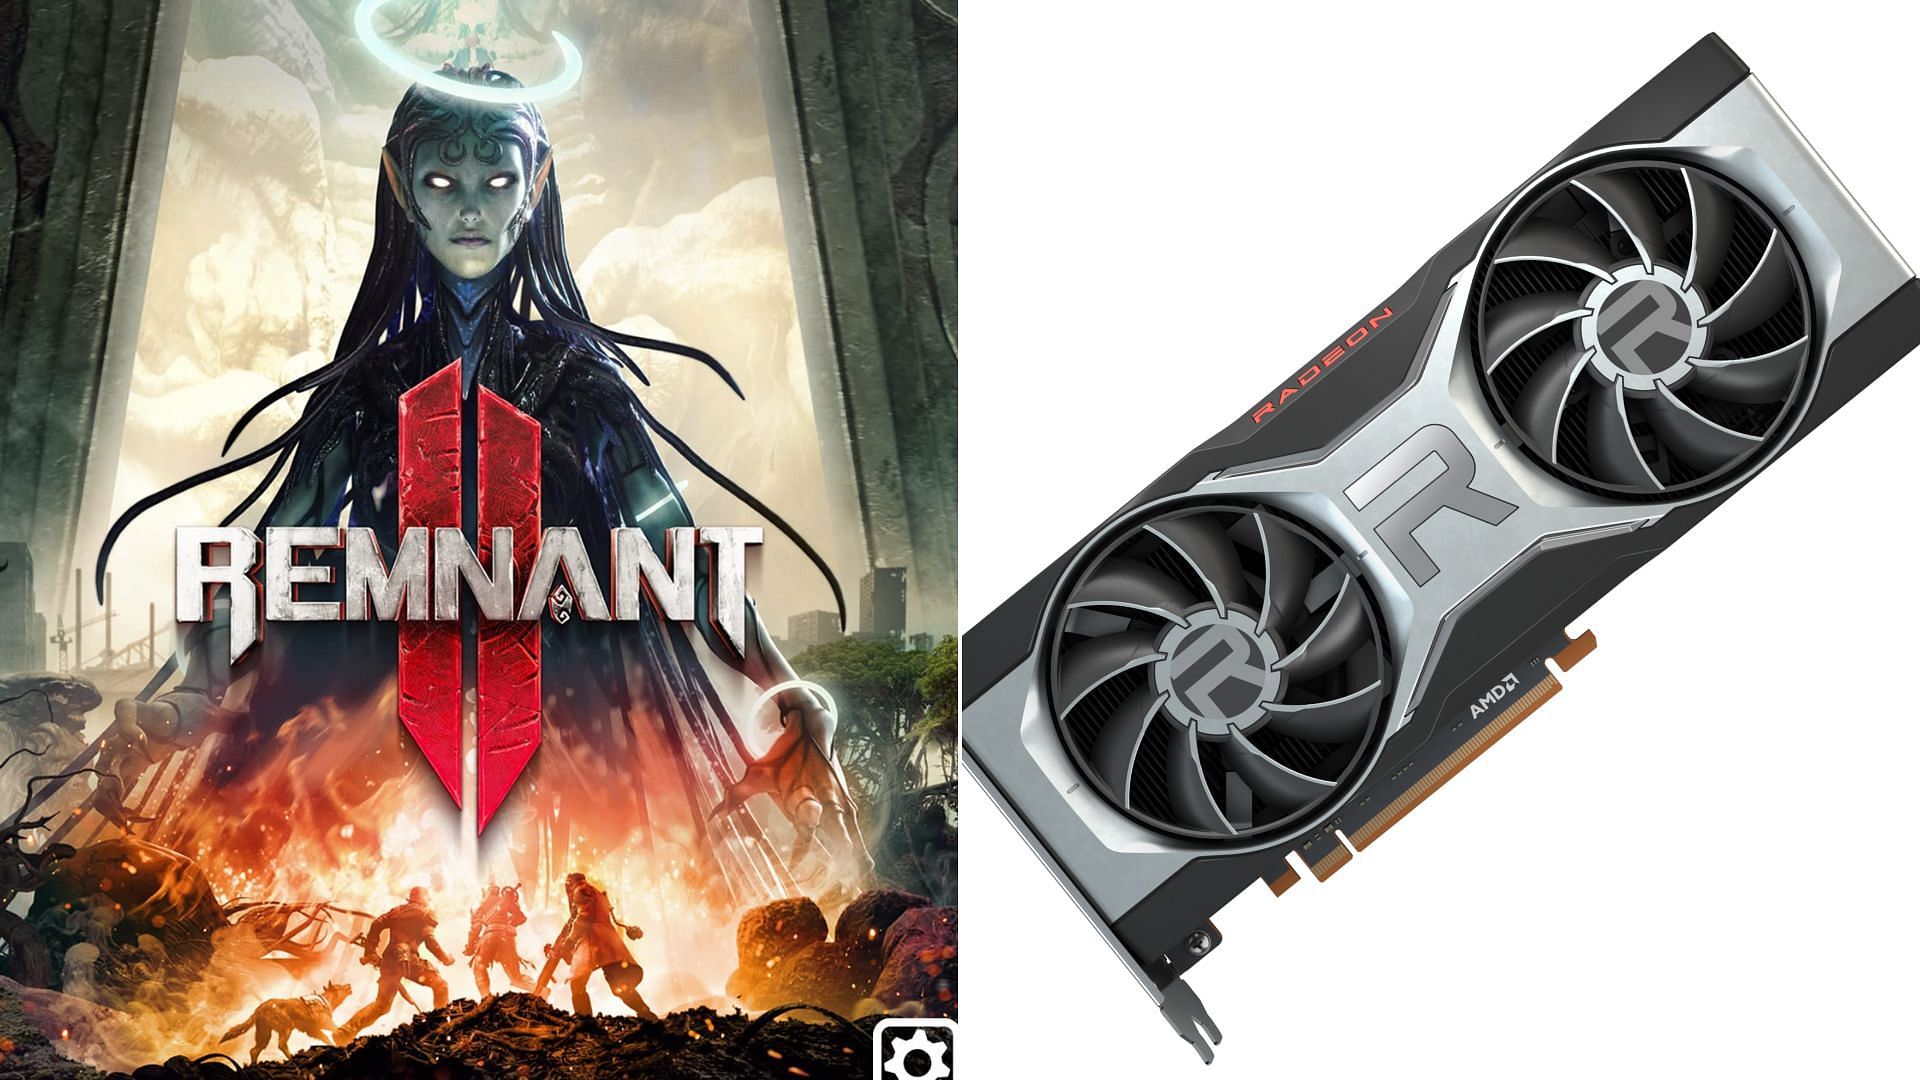 The AMD Radeon RX 6700 XT and RX 6750 XT are decent cards for playing Remnant 2 (Image via AMD and Gearbox)